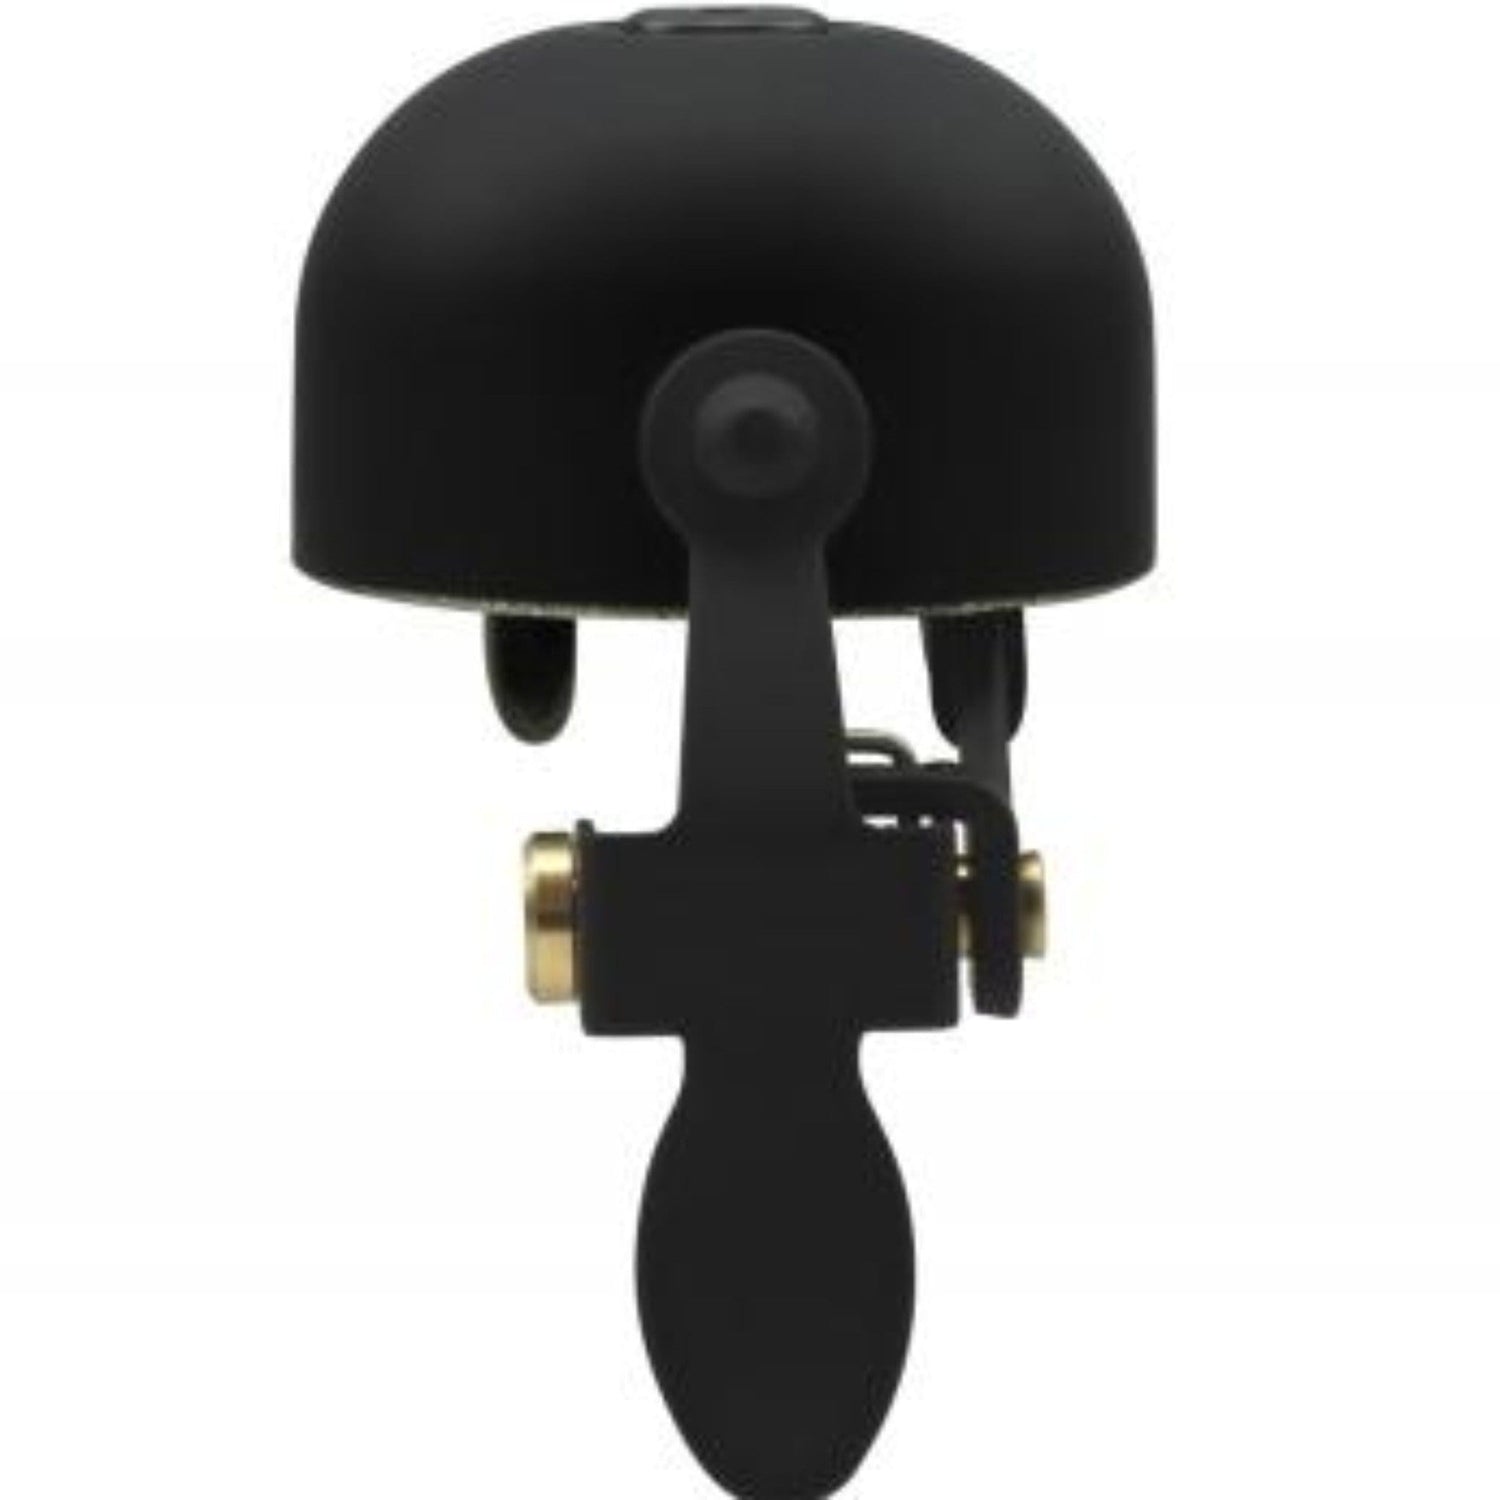 All Black E-NE Bicycle Bell From the Crane Bell Co. Japan